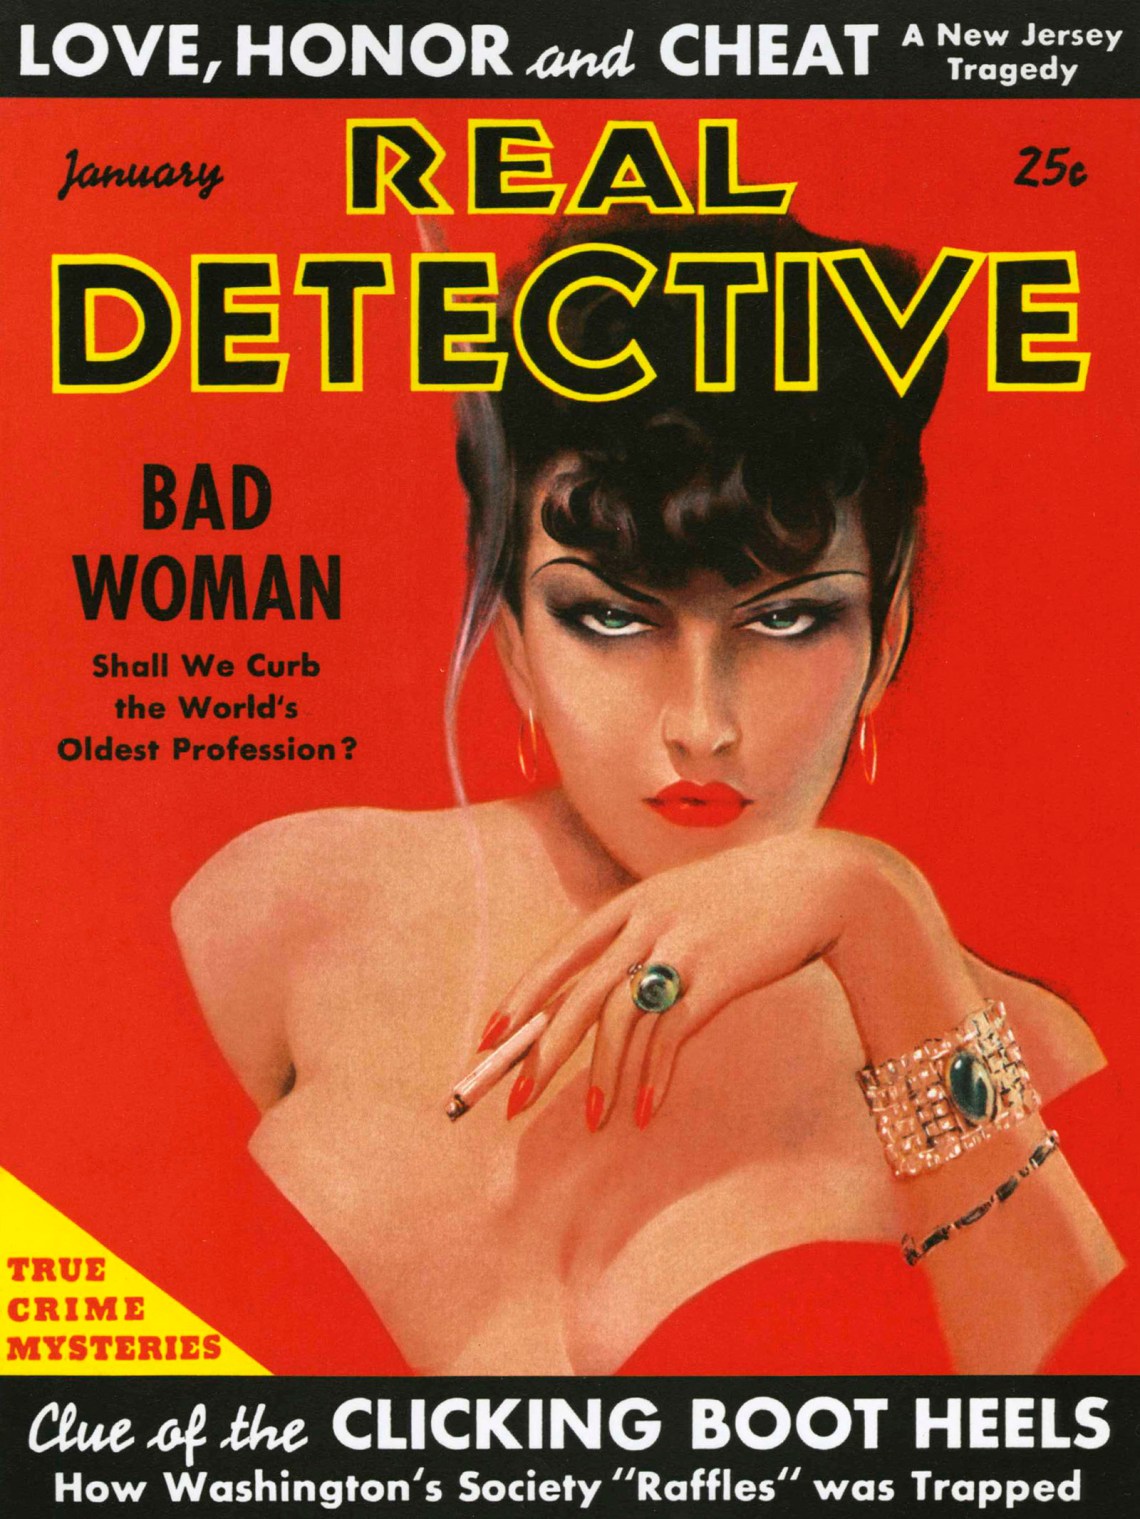 The cover of the January 1938 issue of Real Detective magazine